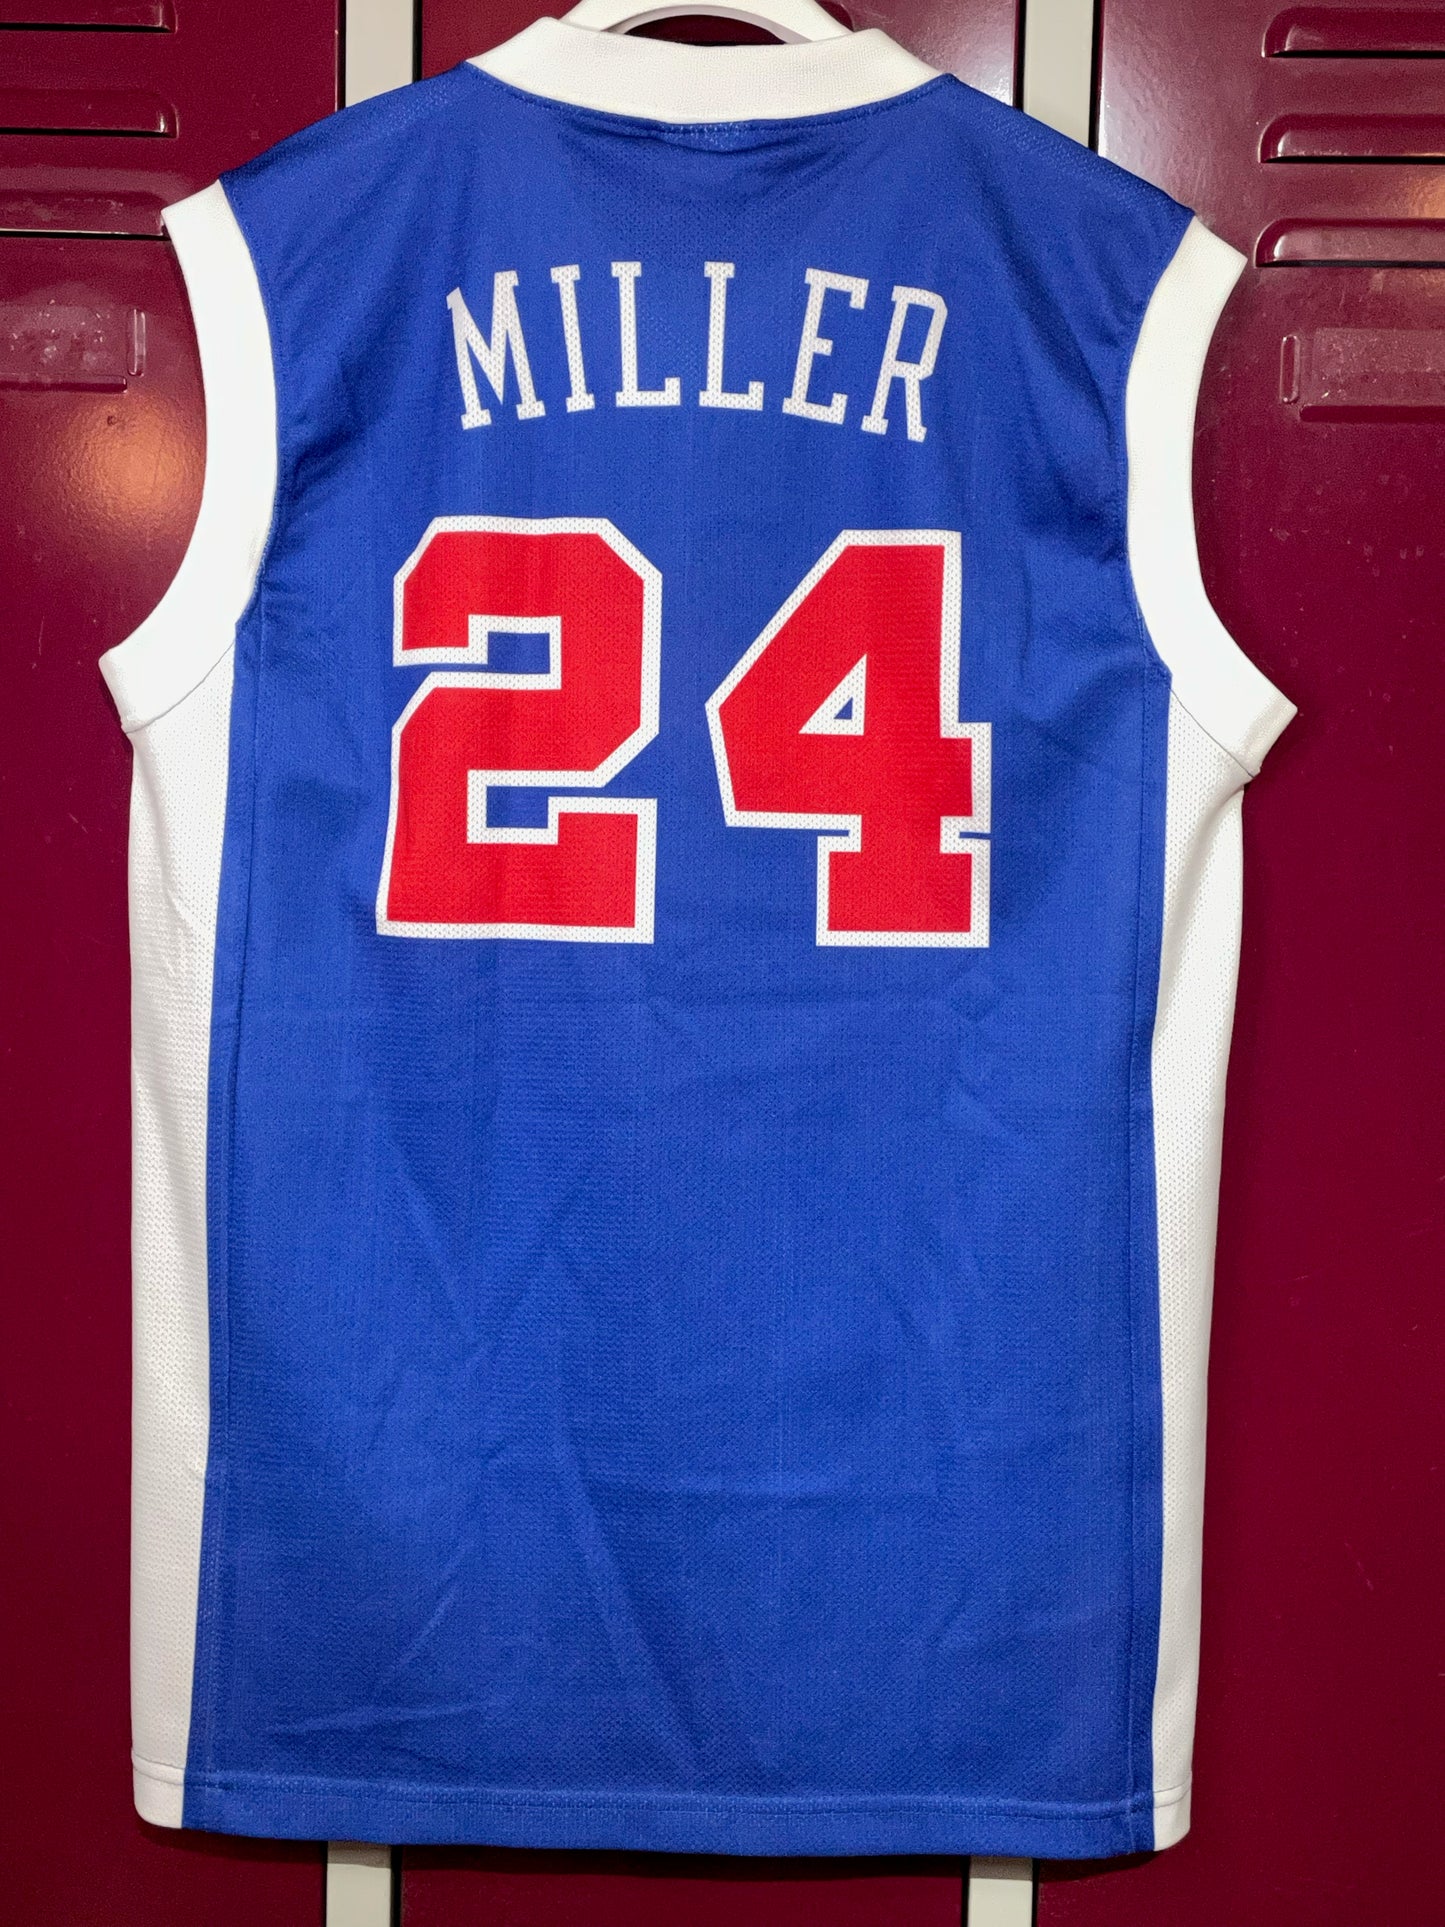 CHAMPION LOS ANGELES CLIPPERS "MILLER" NBA JERSEY  SZ: M